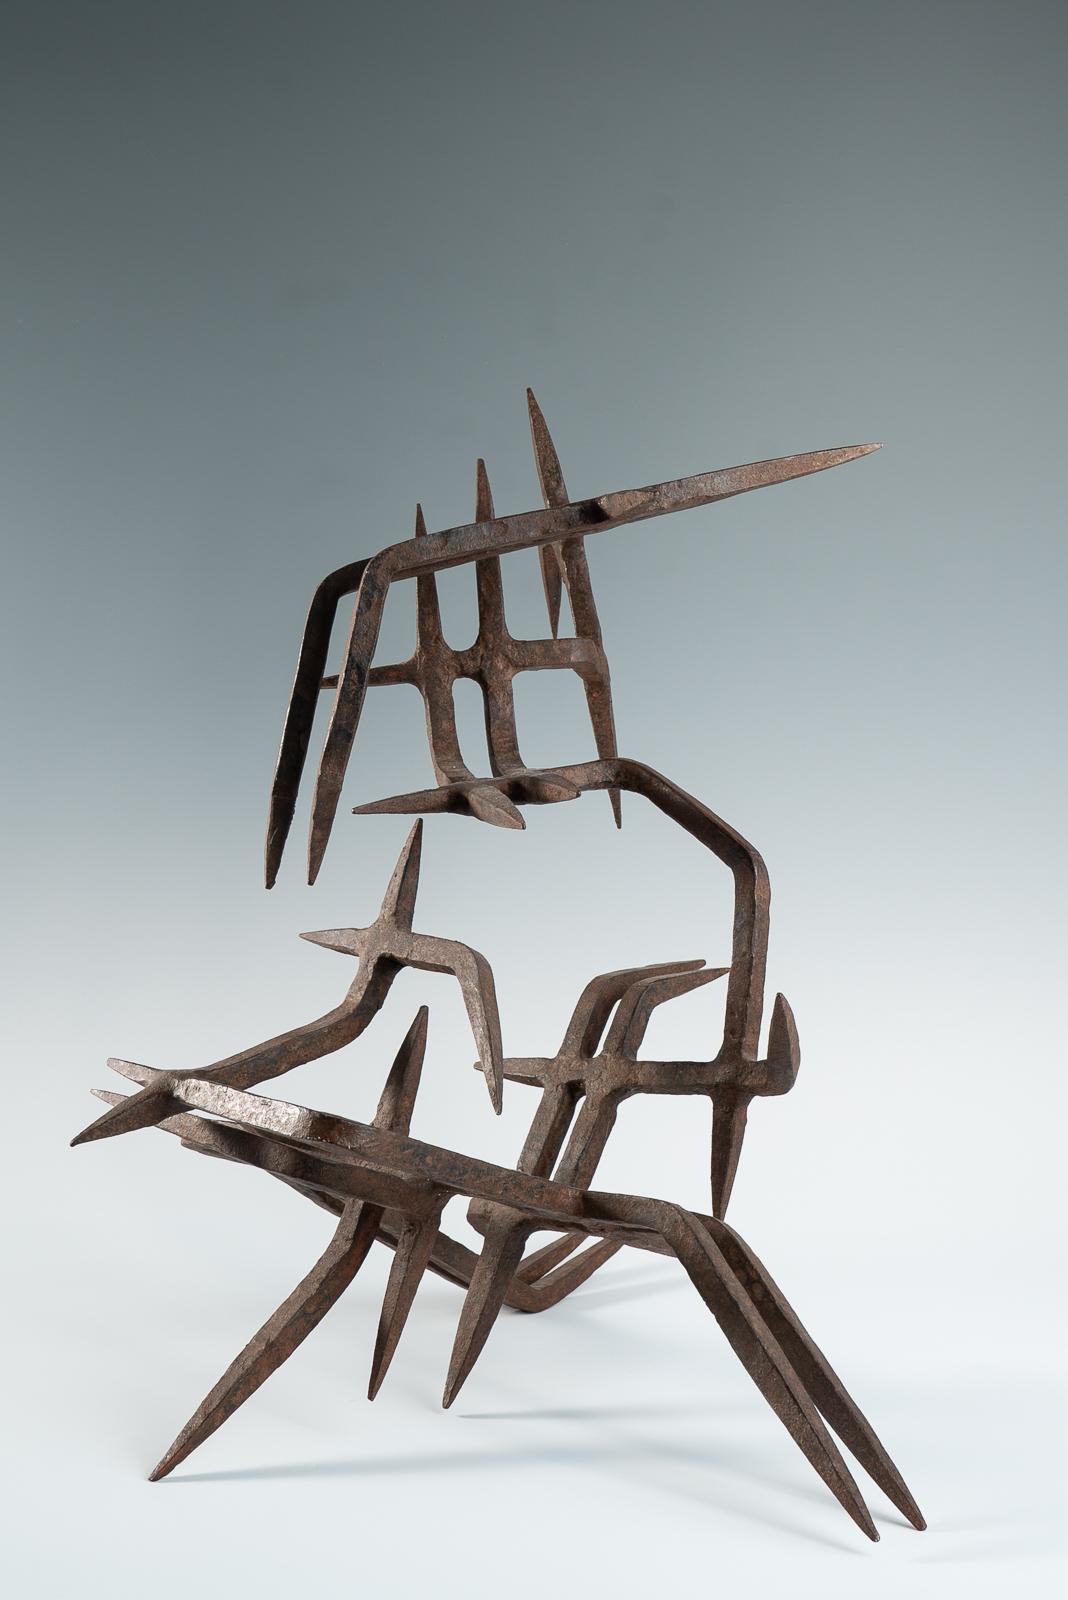 Rare wrought iron sculpture by Marcello Fantoni

Signed Fantoni, 1960

Italy, circa 1960.

Provenance: sourced directly from the Fantoni family

This piece was exhibited in 2015 at the Palazzo Medici Riccardi, Florence
Also, it was